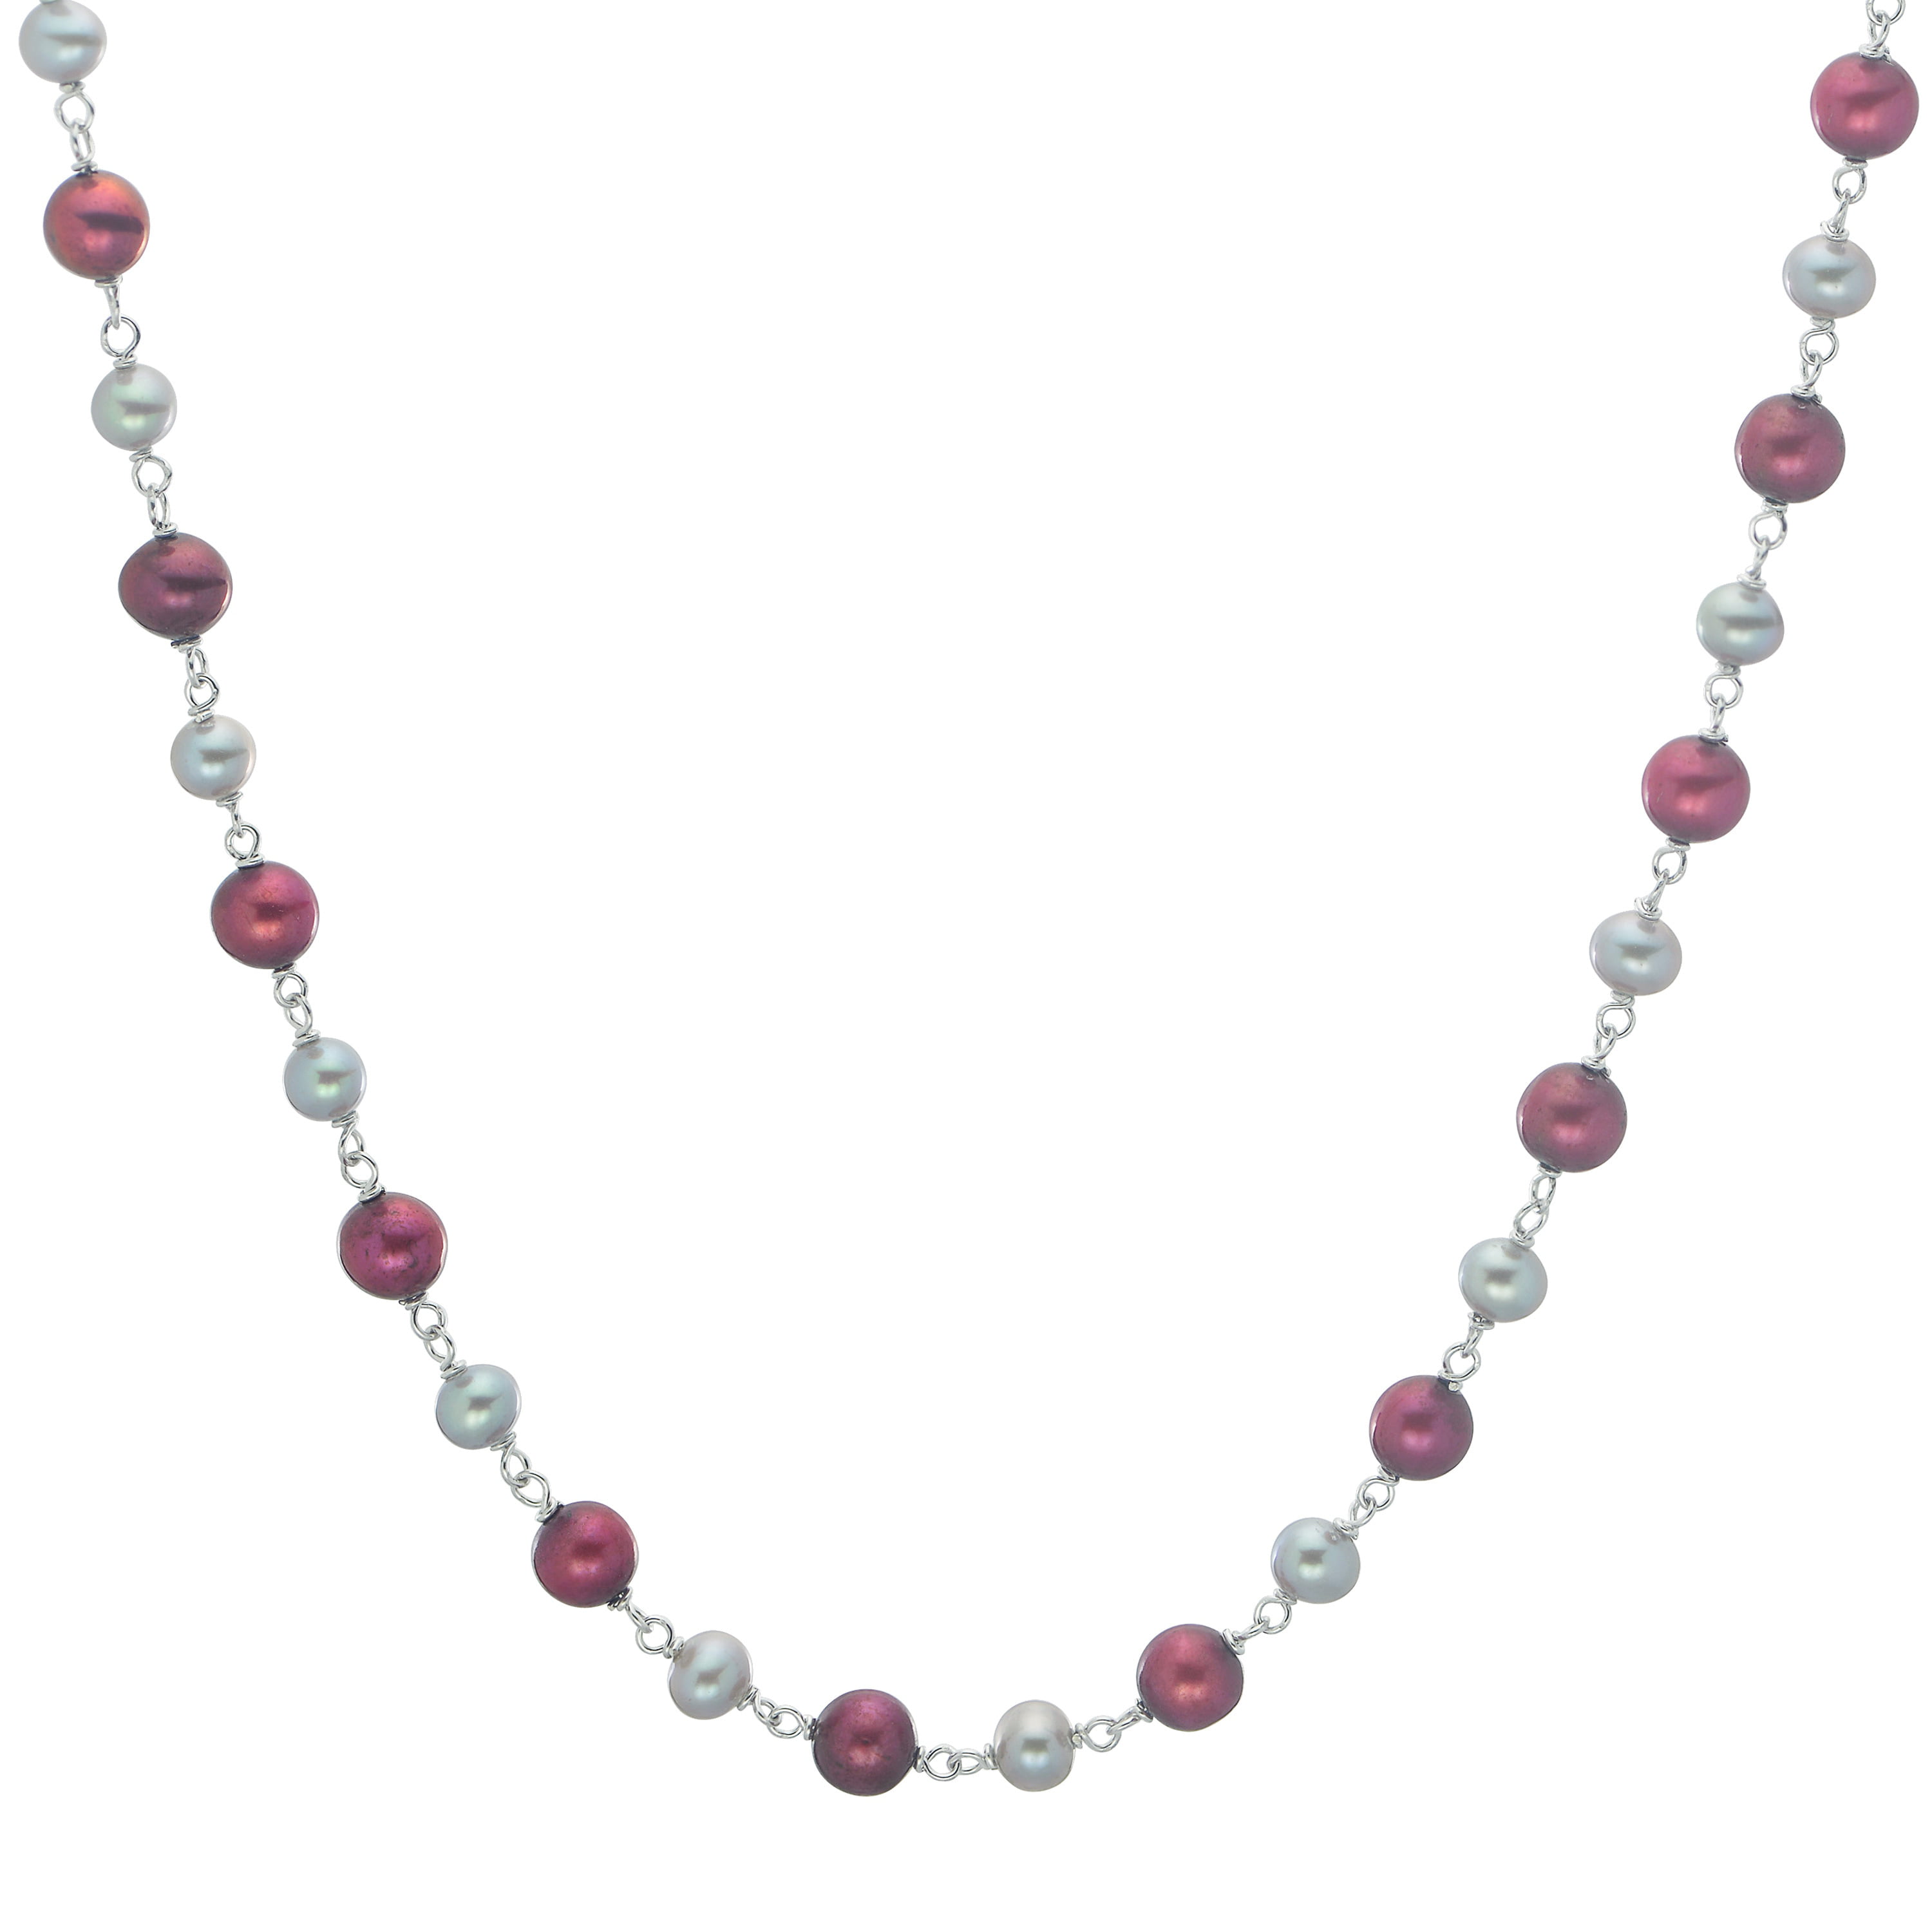 Sterling Silver Pearl Necklace 5 mm Freshwater 17 inch long